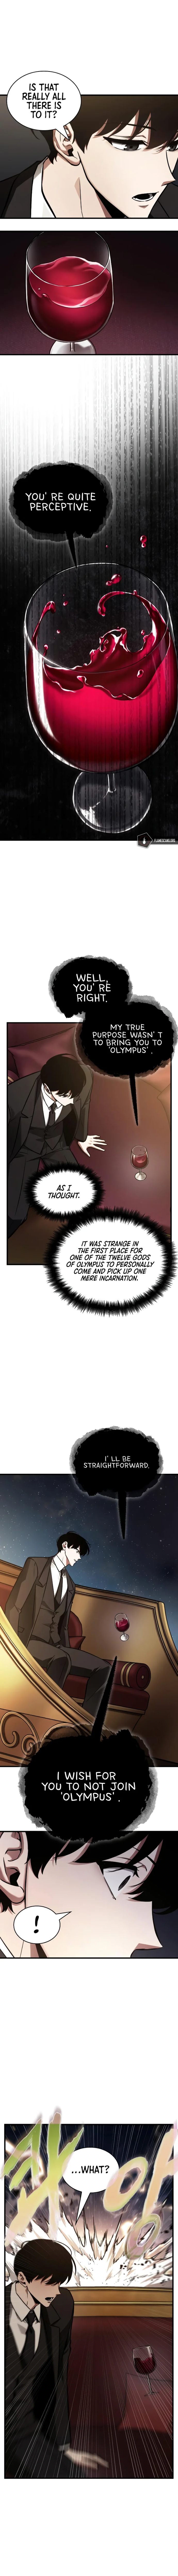 Omniscient Reader's Viewpoint - Chapter 166 Page 5